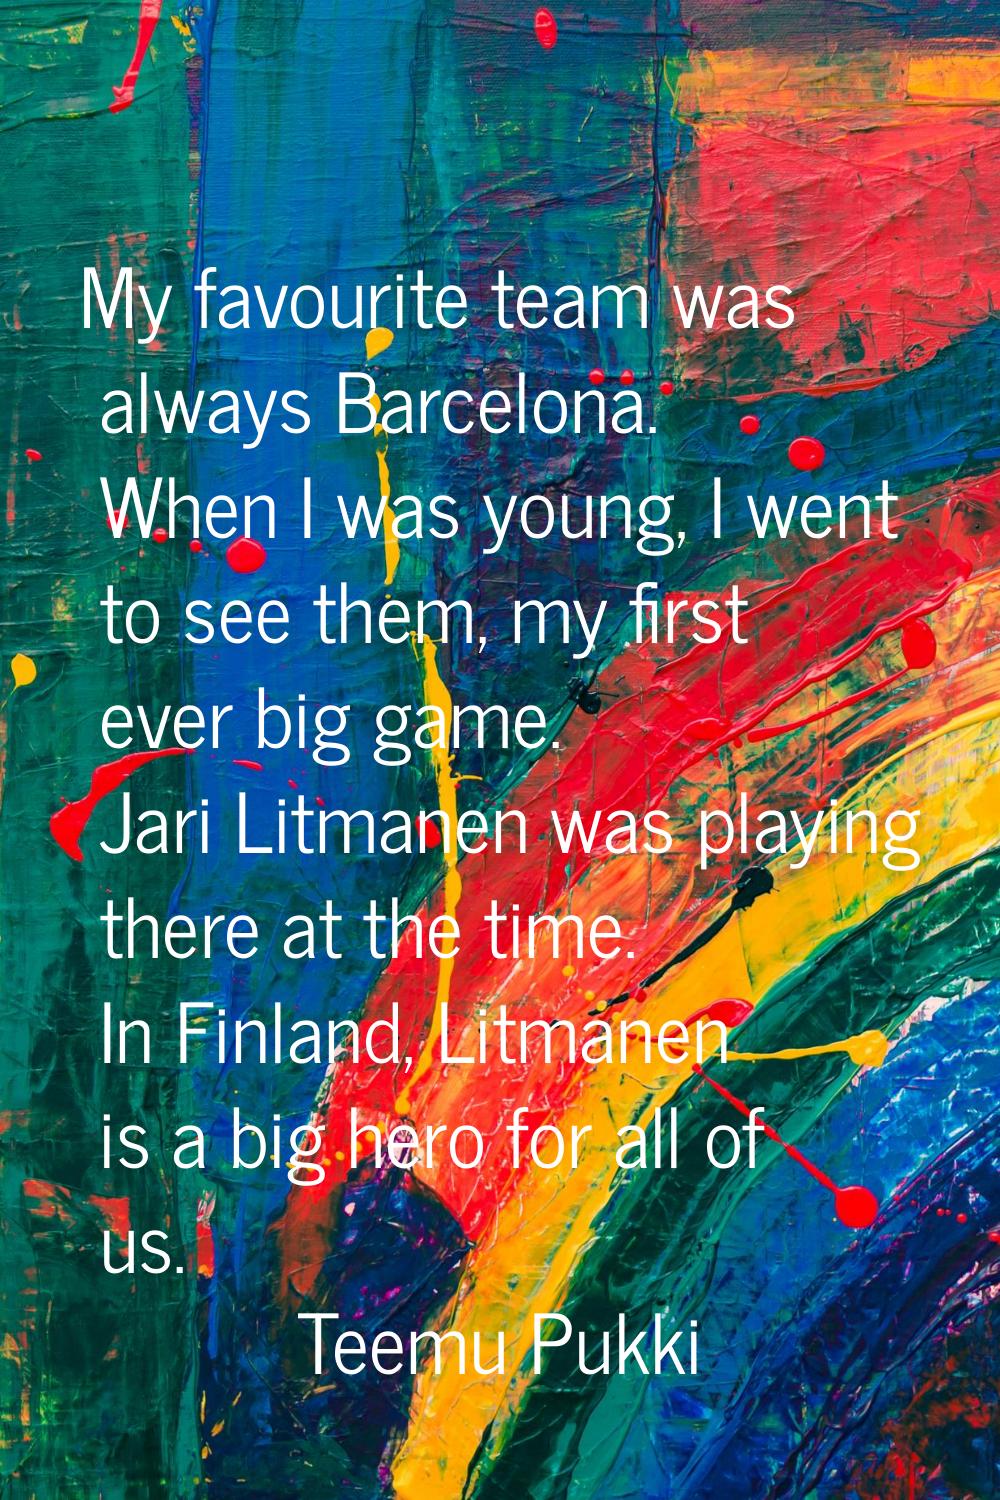 My favourite team was always Barcelona. When I was young, I went to see them, my first ever big gam